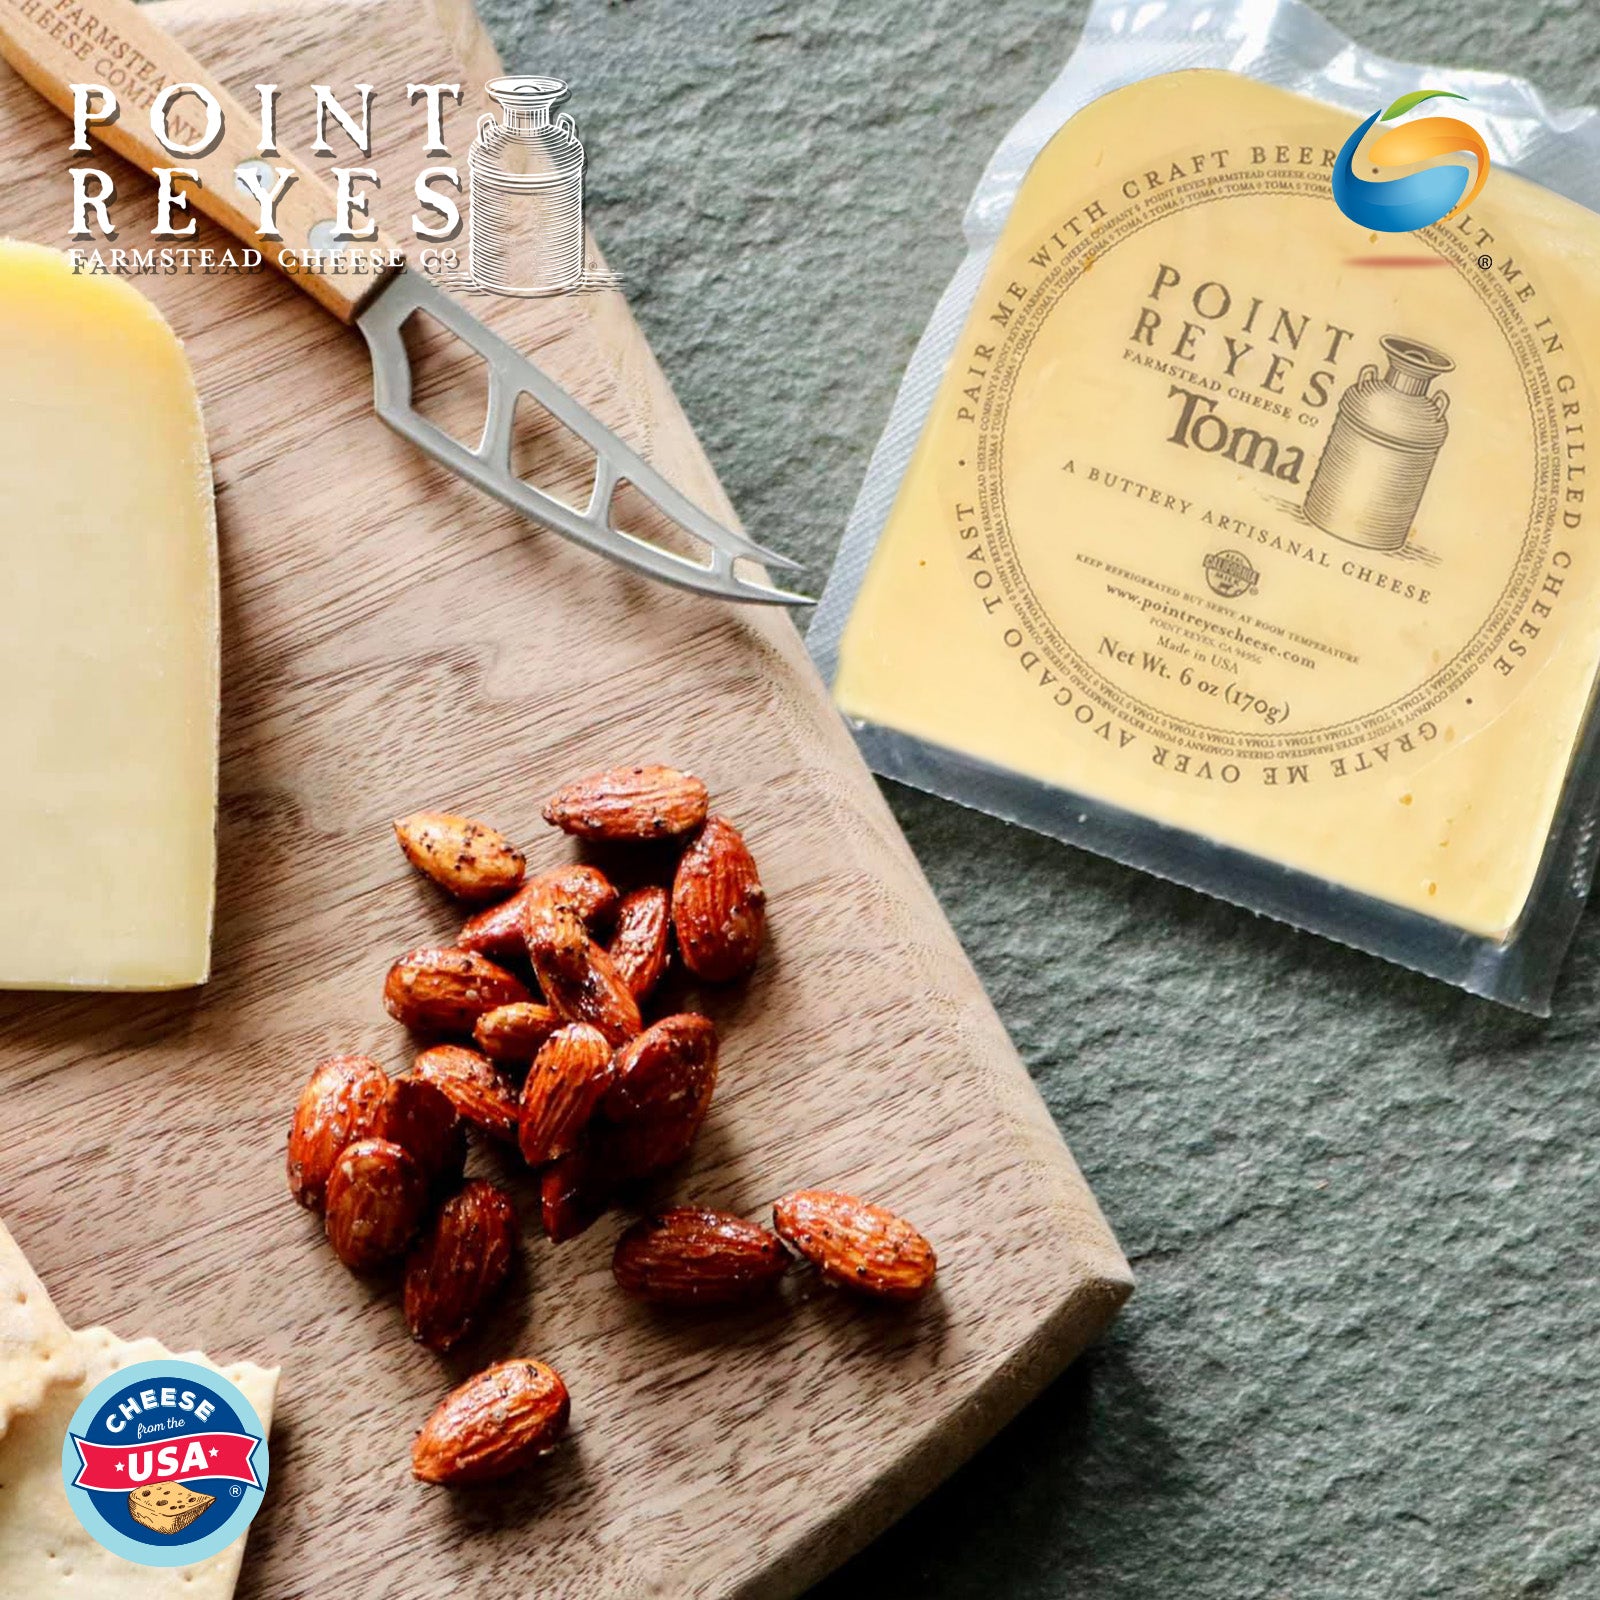 POINT REYES Cheeses 170G